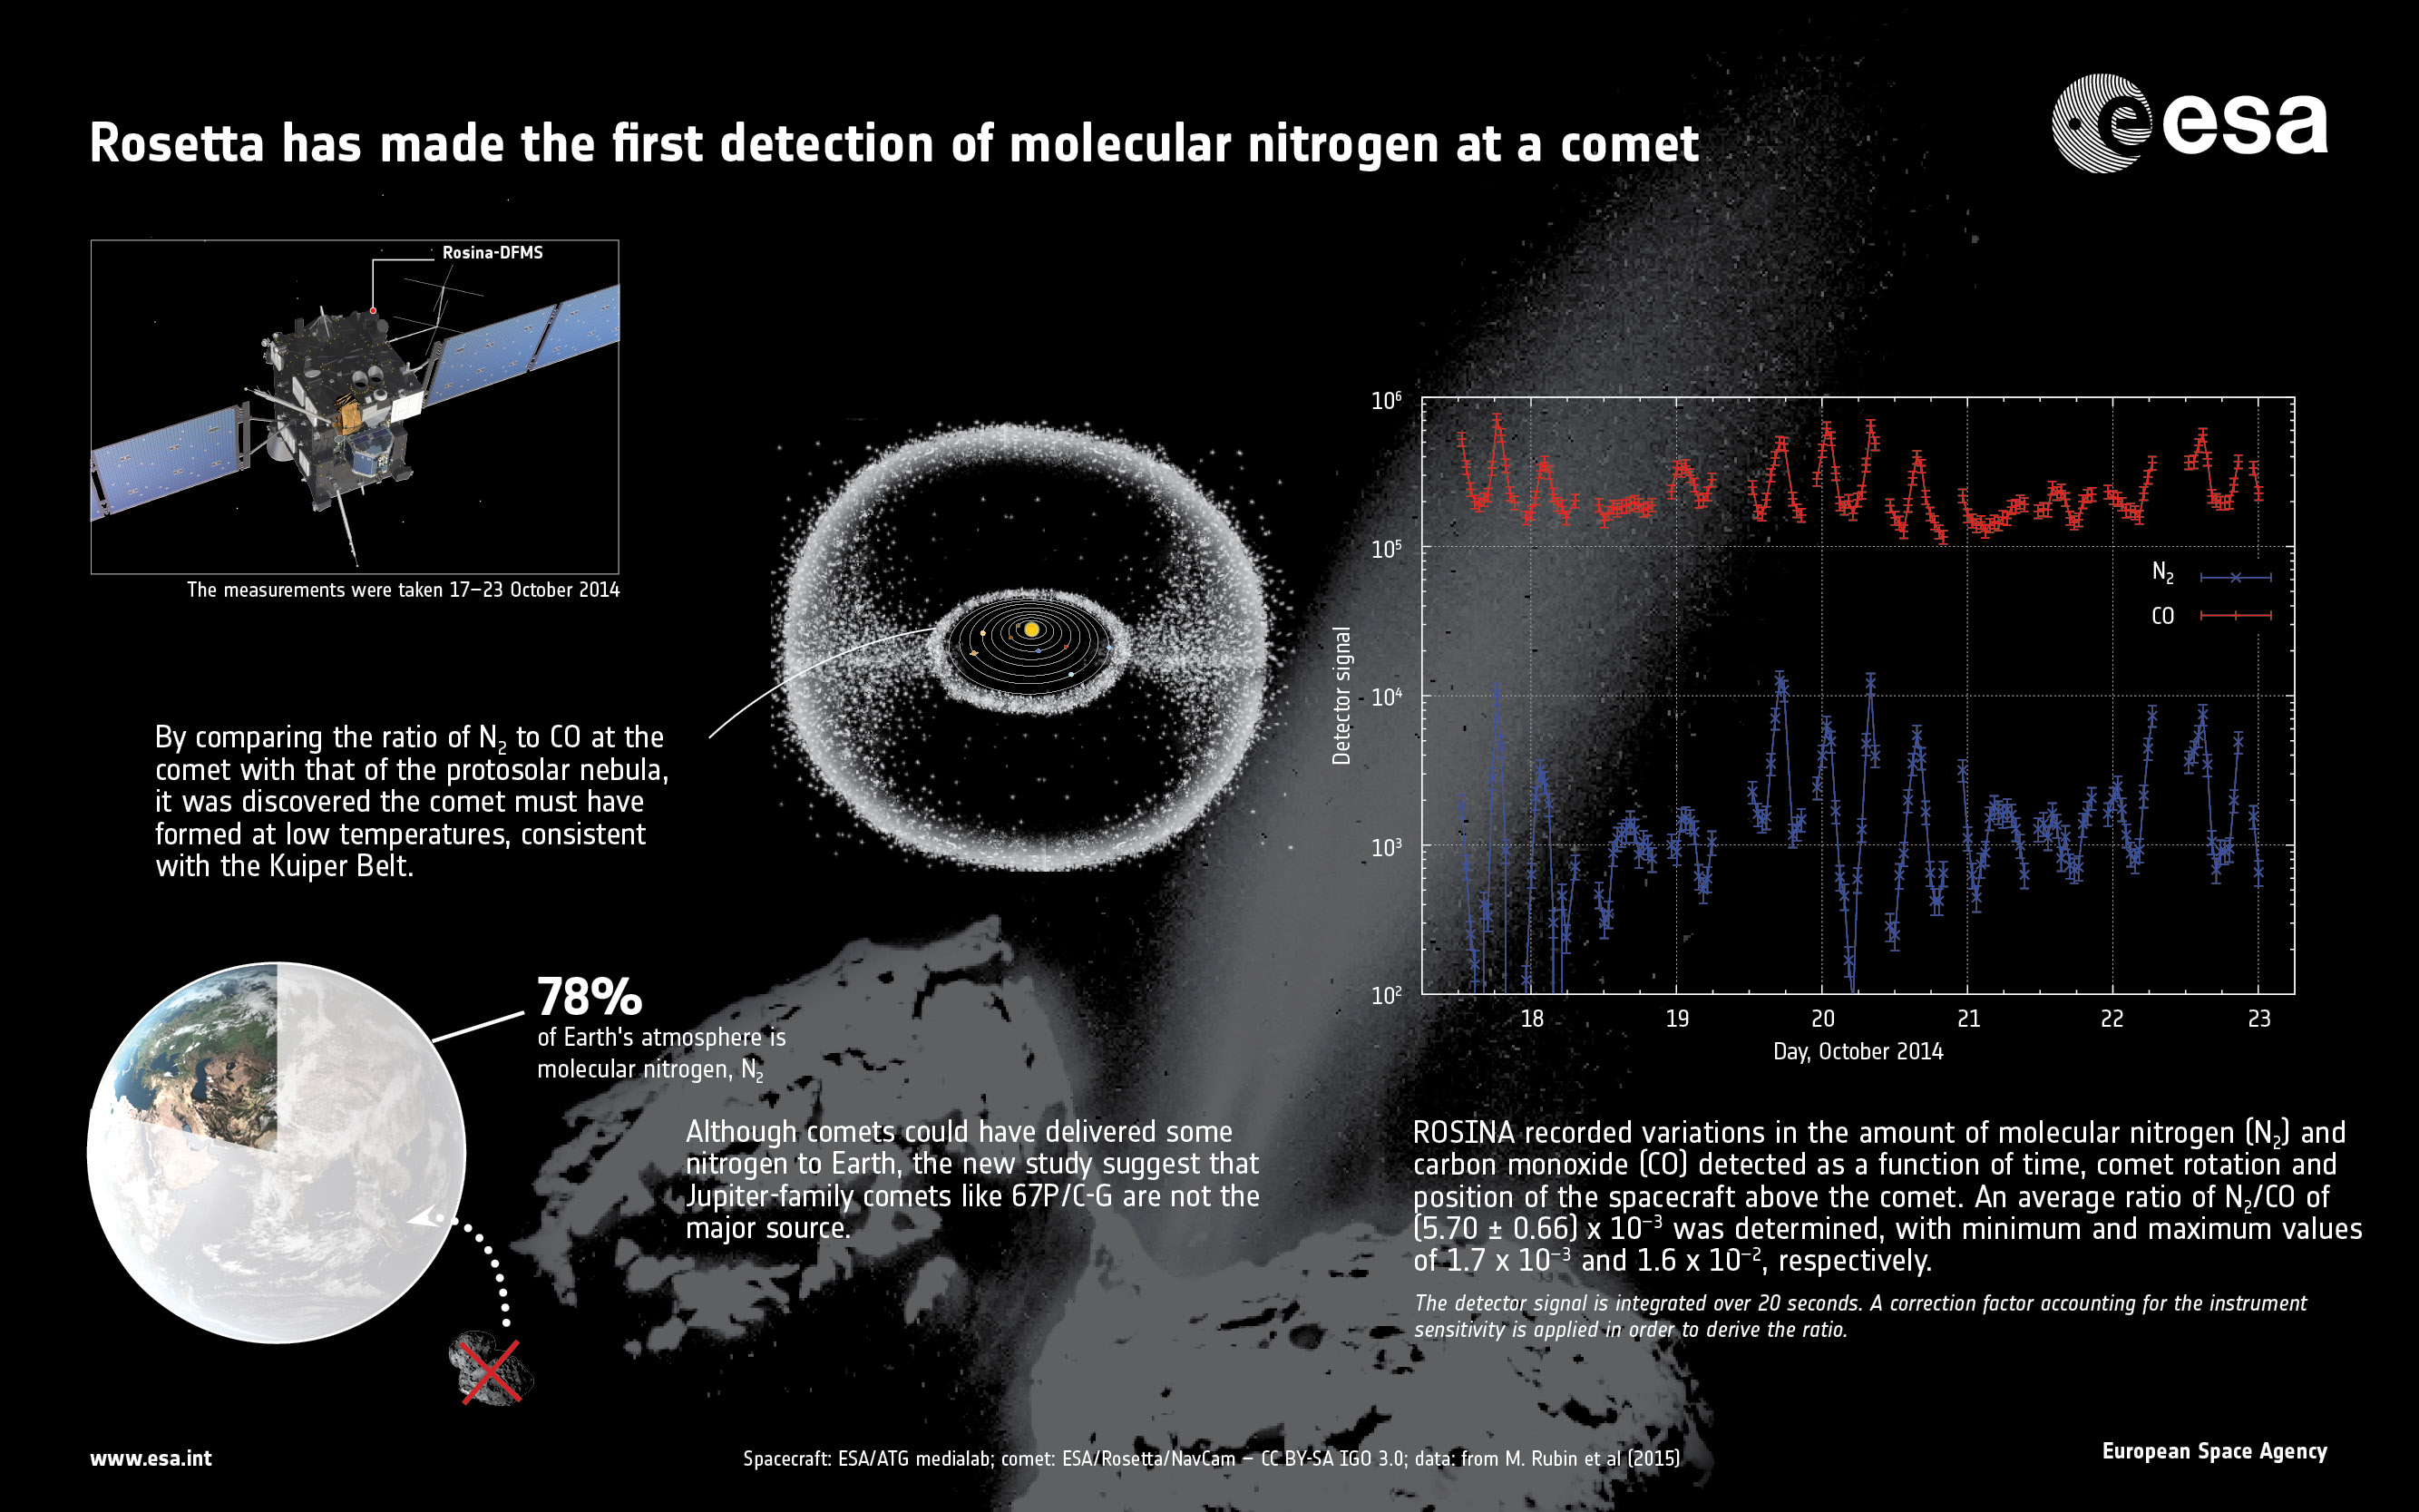 First detection of molecular nitrogen at a comet